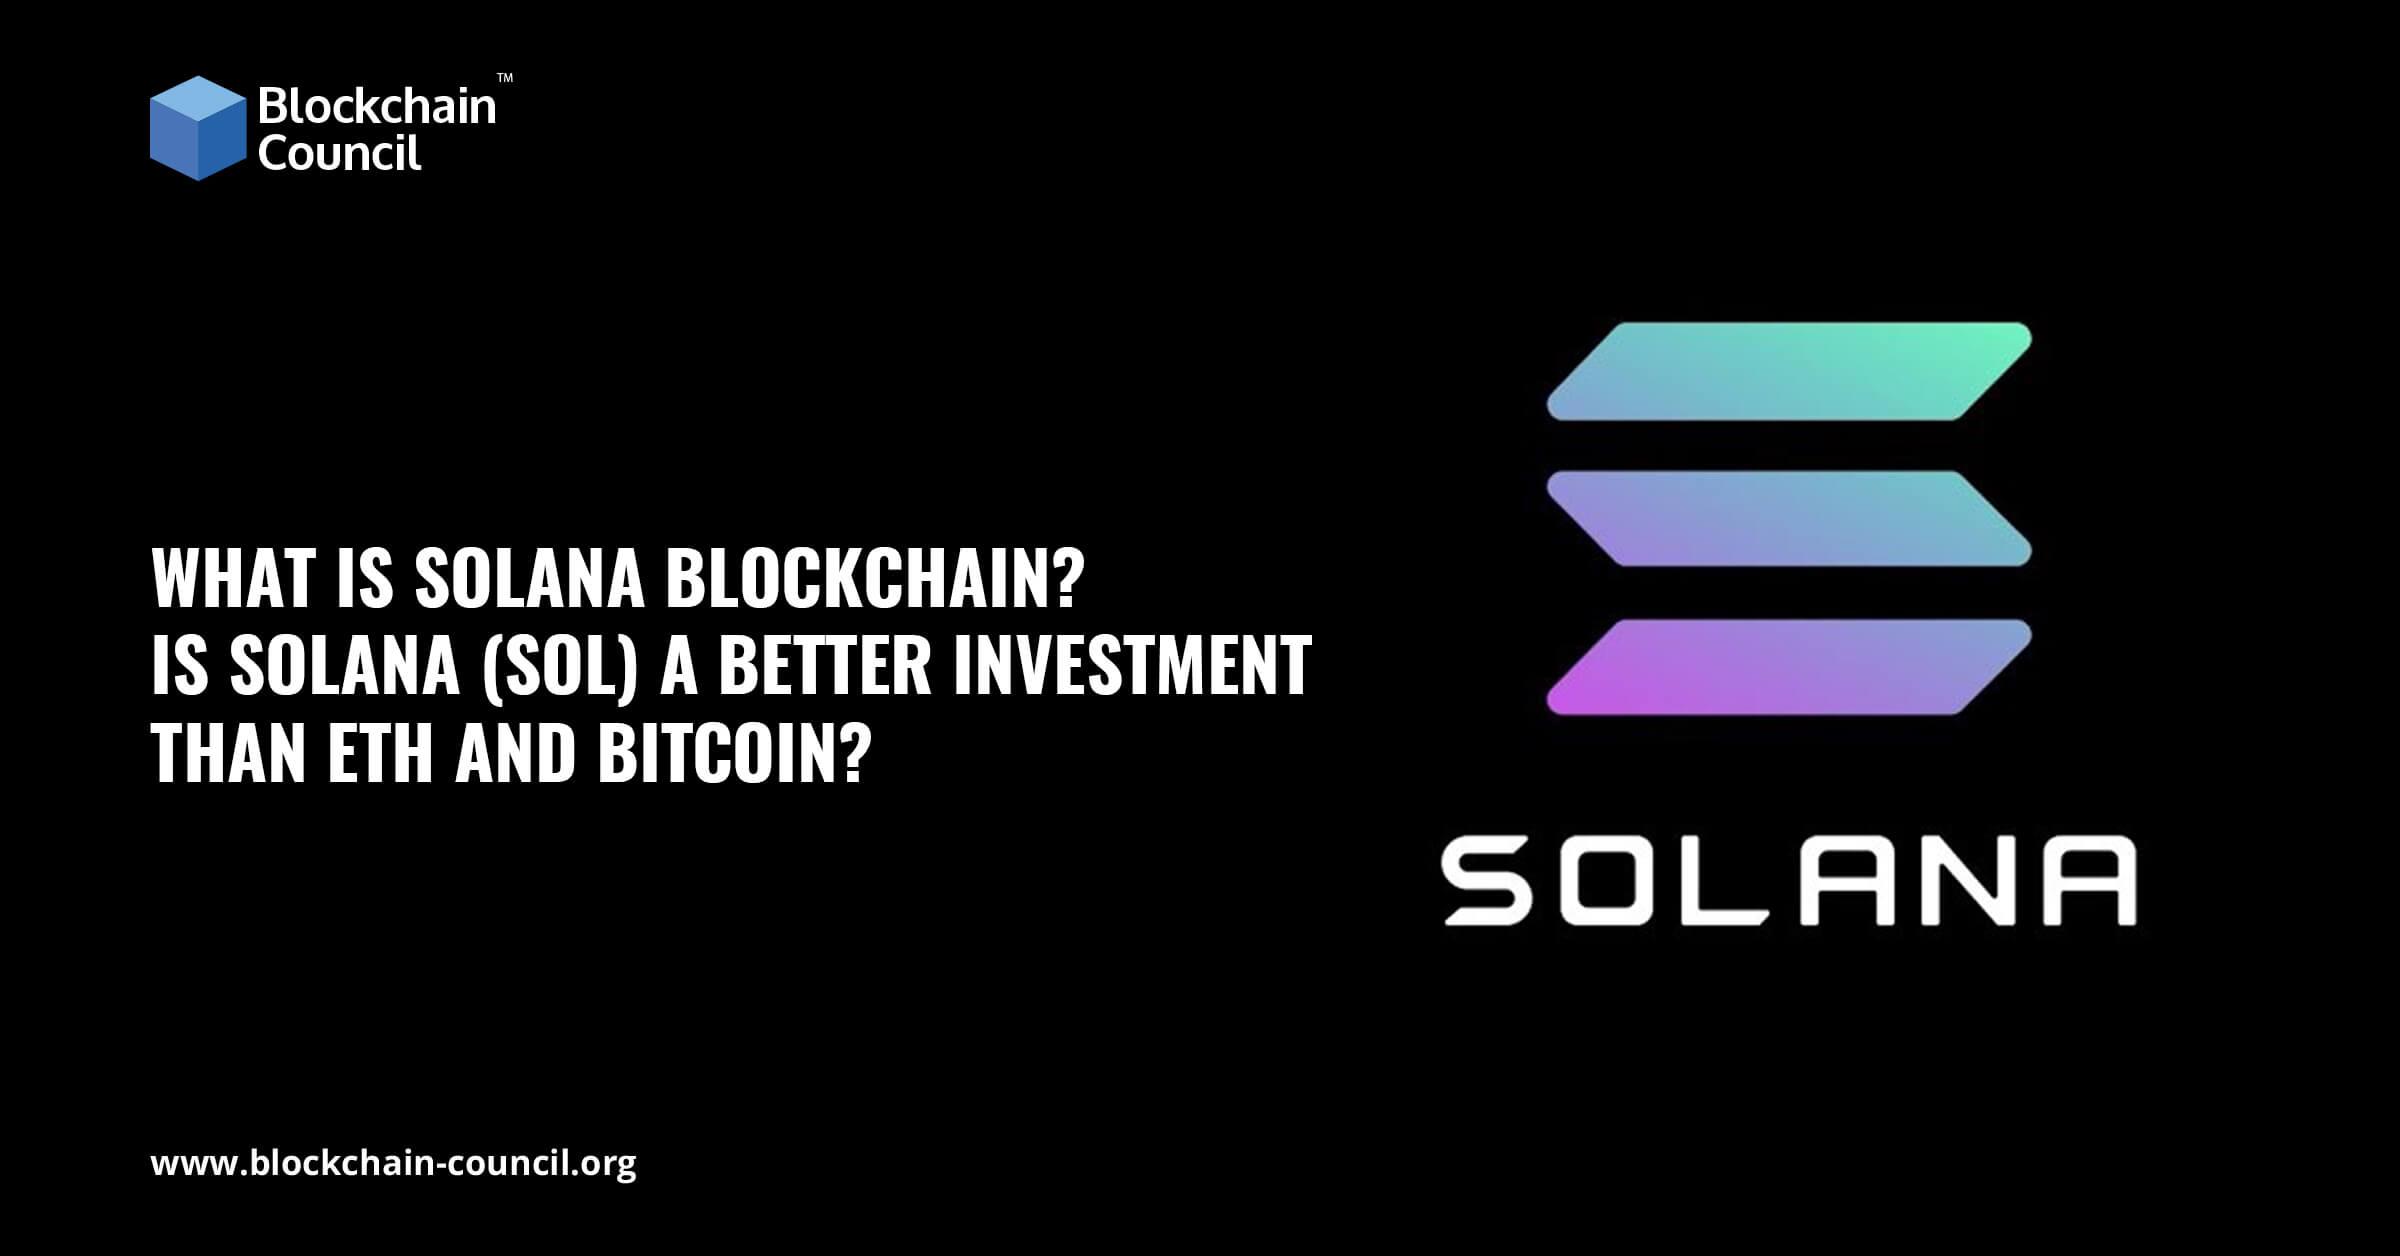 What is Solana Blockchain? Is Solana a better investment than ETH and Bitcoin?